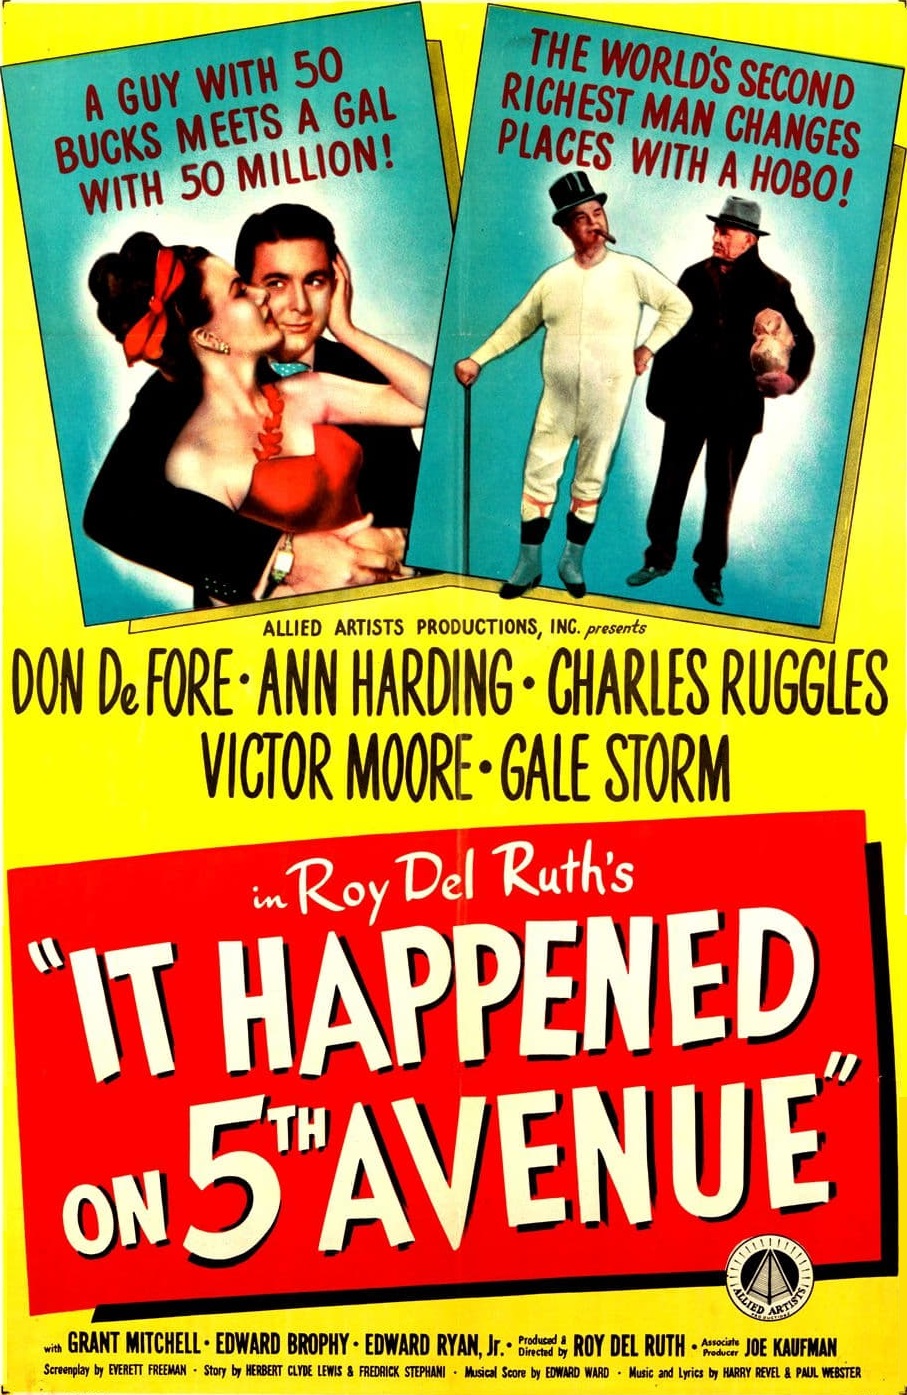 Movie Poster for It Happened One Night. It Happened on night is displayed in Yellow font. One man eating a carott while a lady is looking at him. 